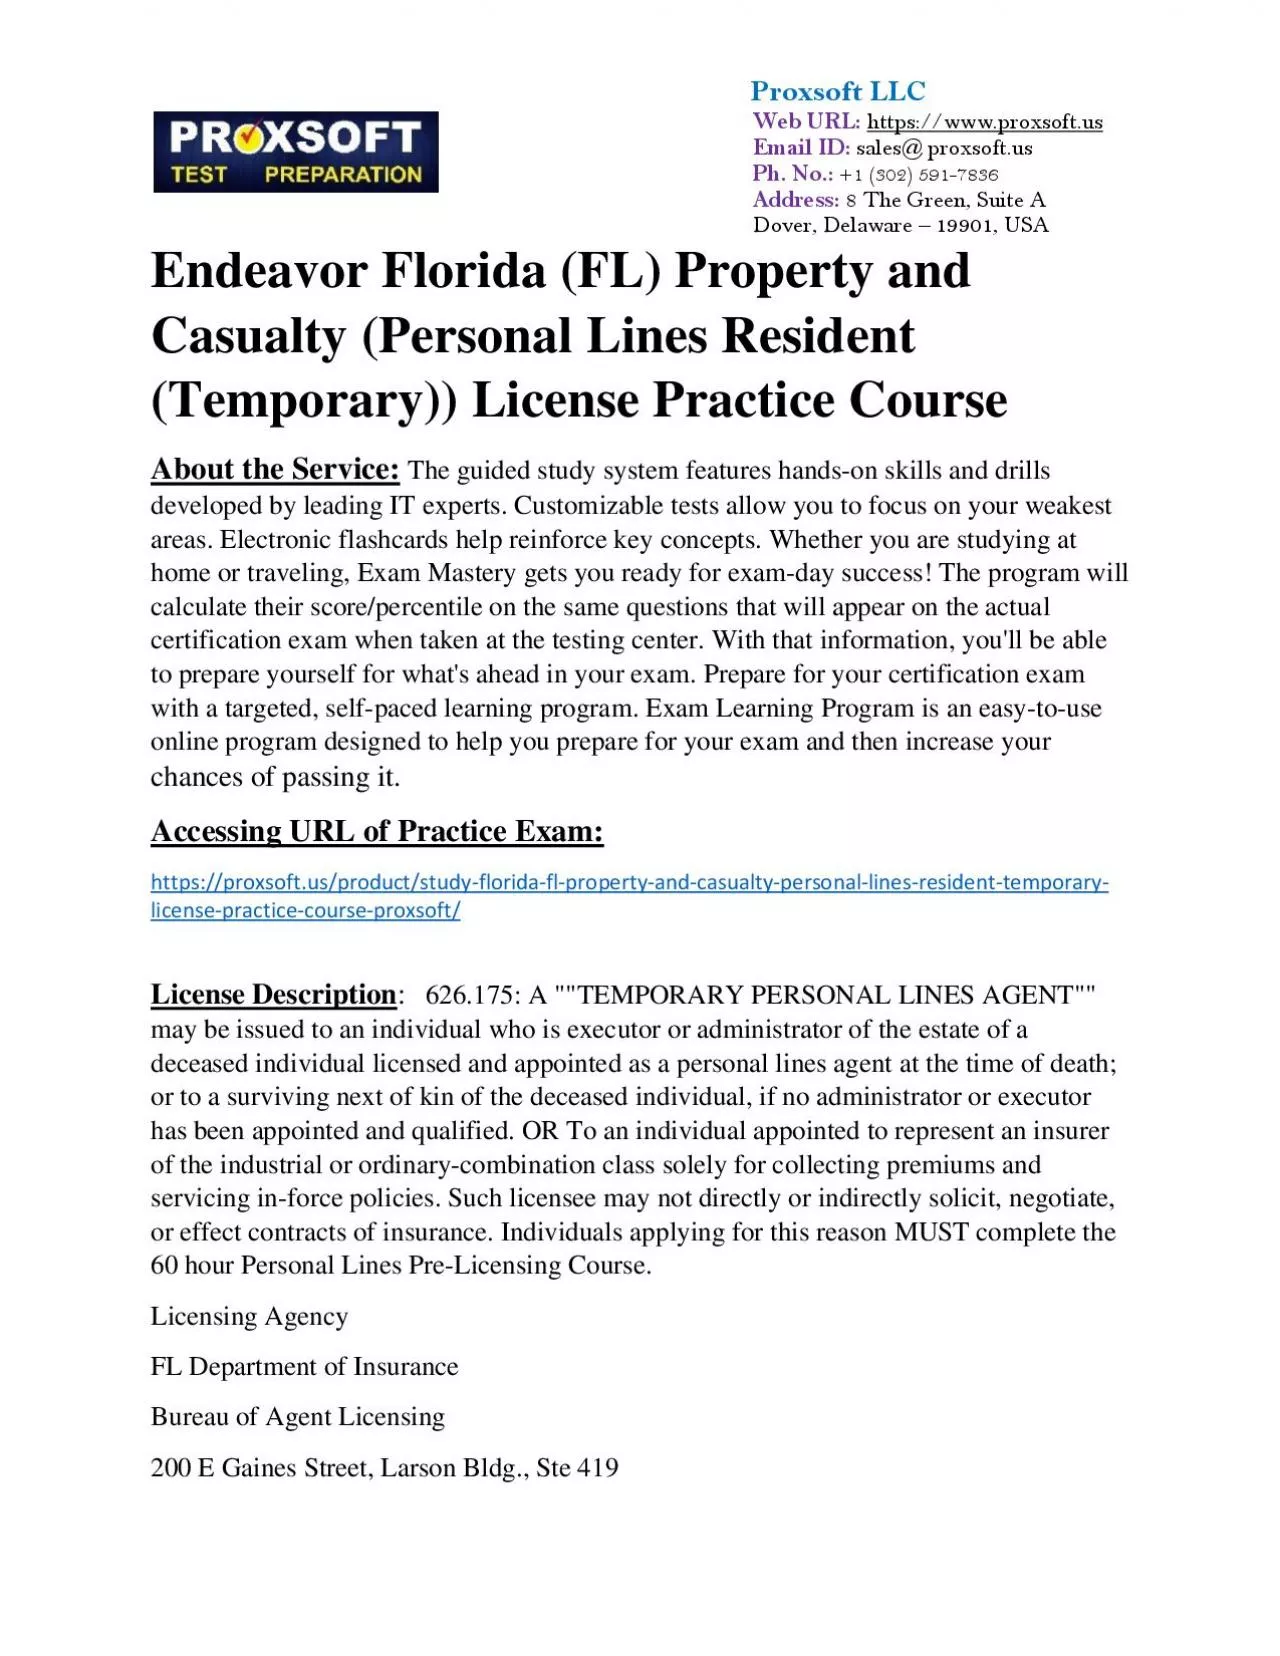 Endeavor Florida (FL) Property and Casualty (Personal Lines Resident (Temporary)) License